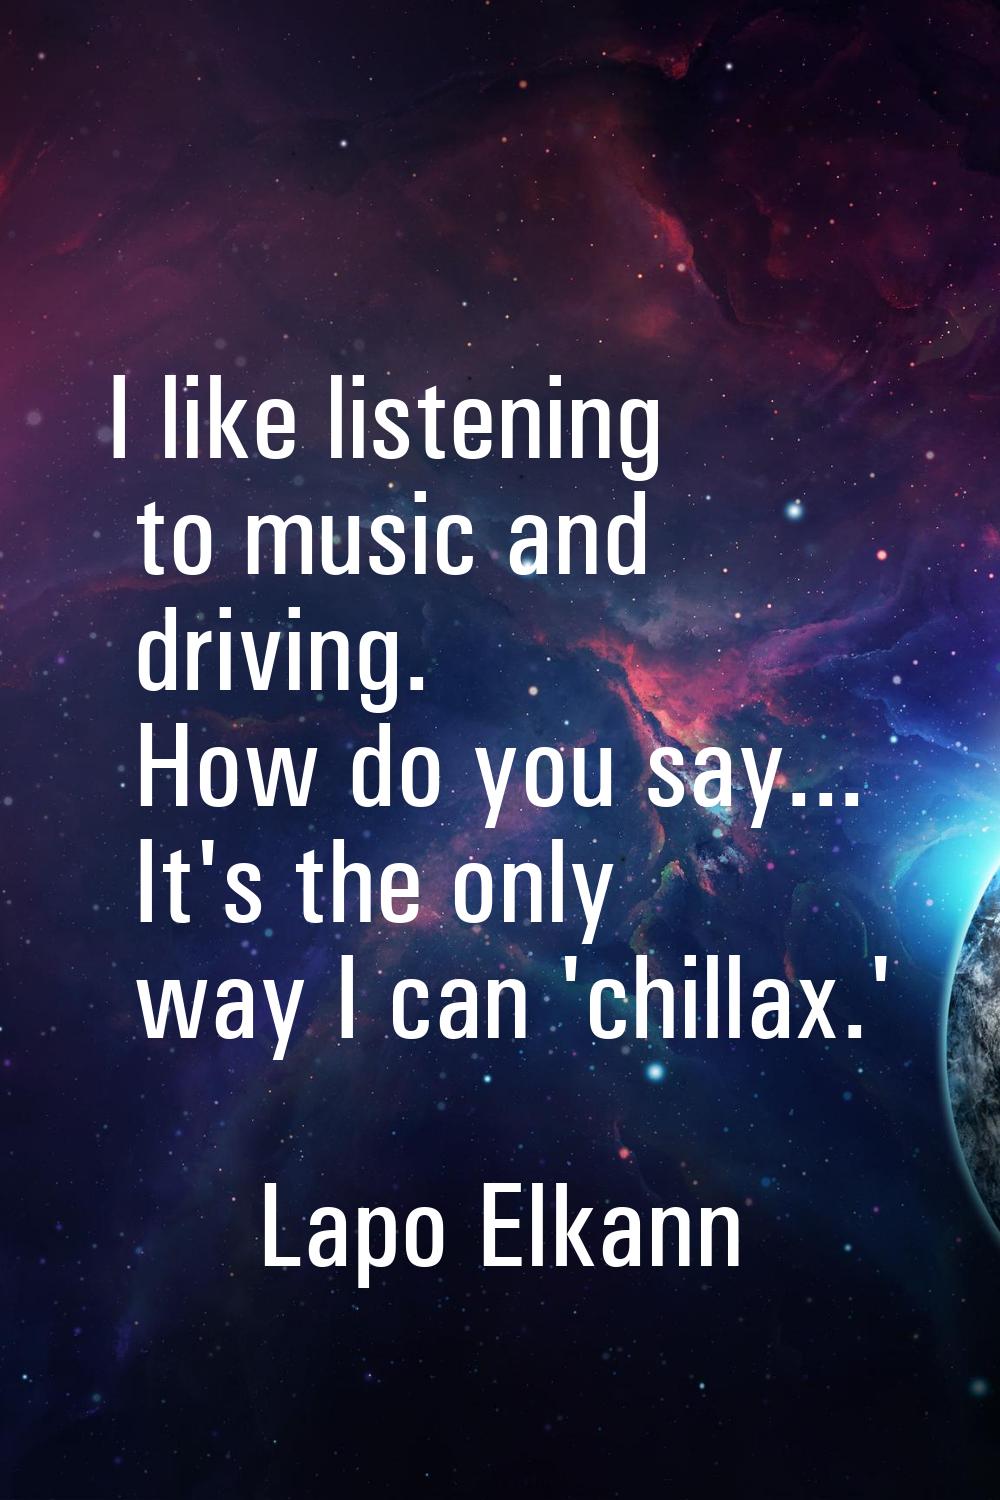 I like listening to music and driving. How do you say... It's the only way I can 'chillax.'